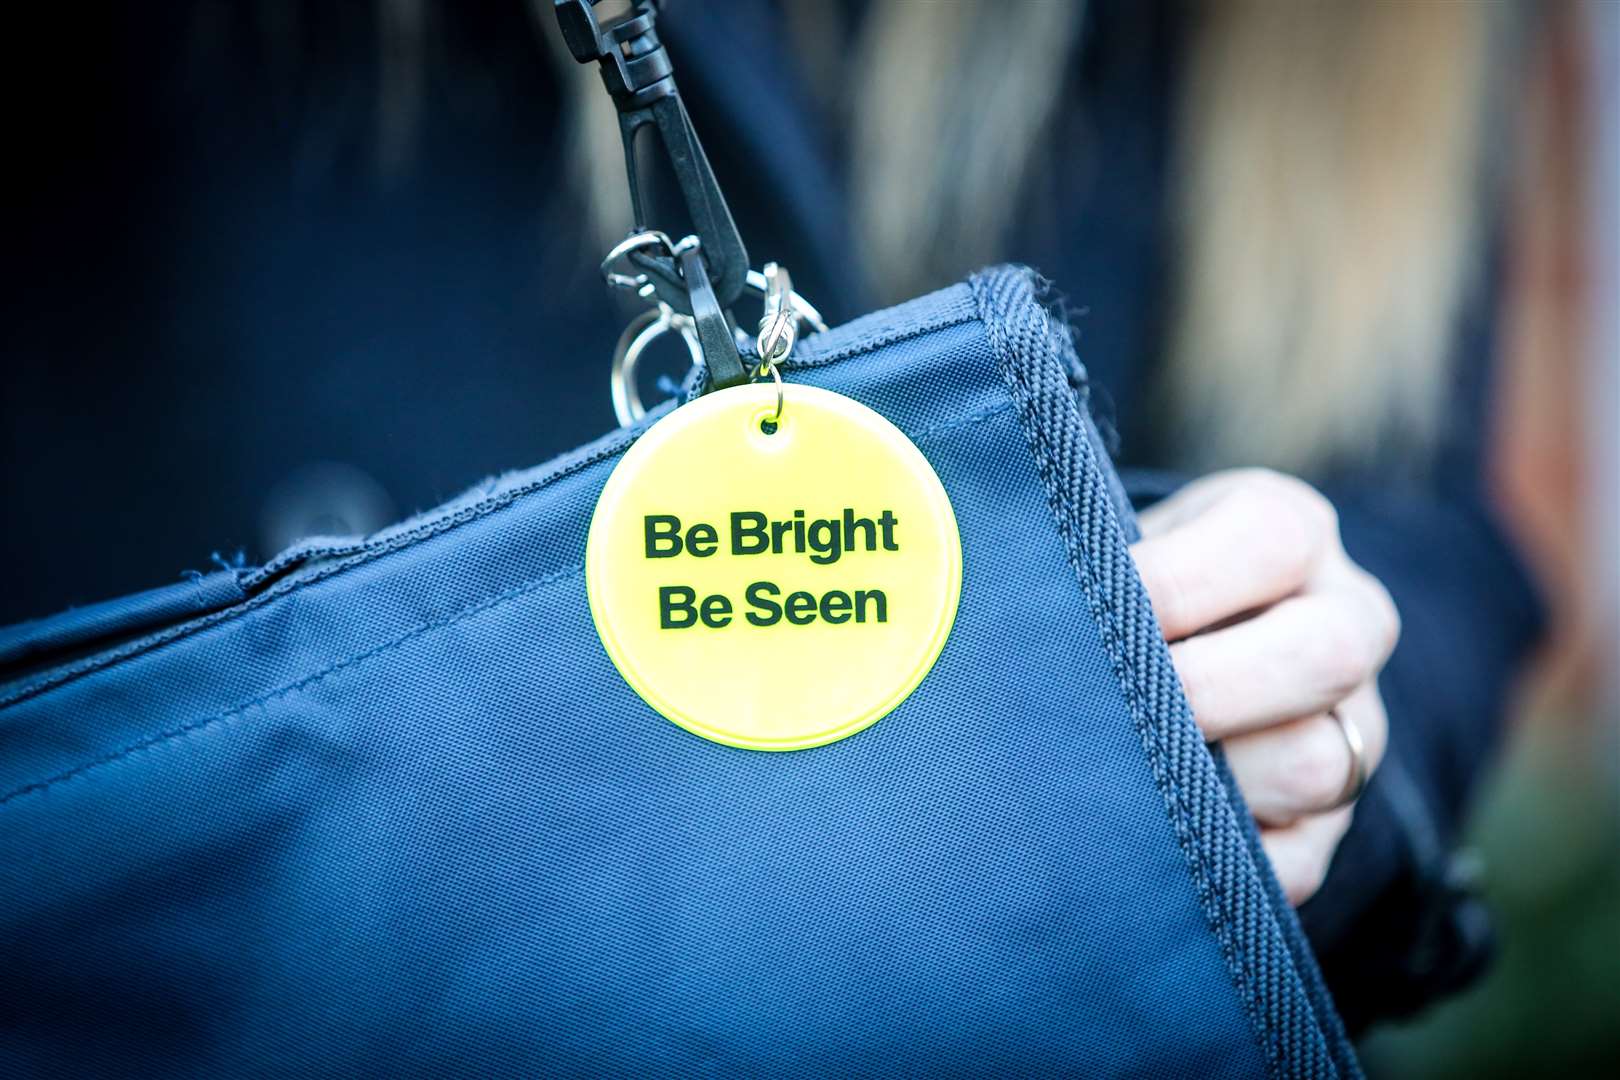 Make sure your children and bright and can be seen this winter using reflective strips or keyrings